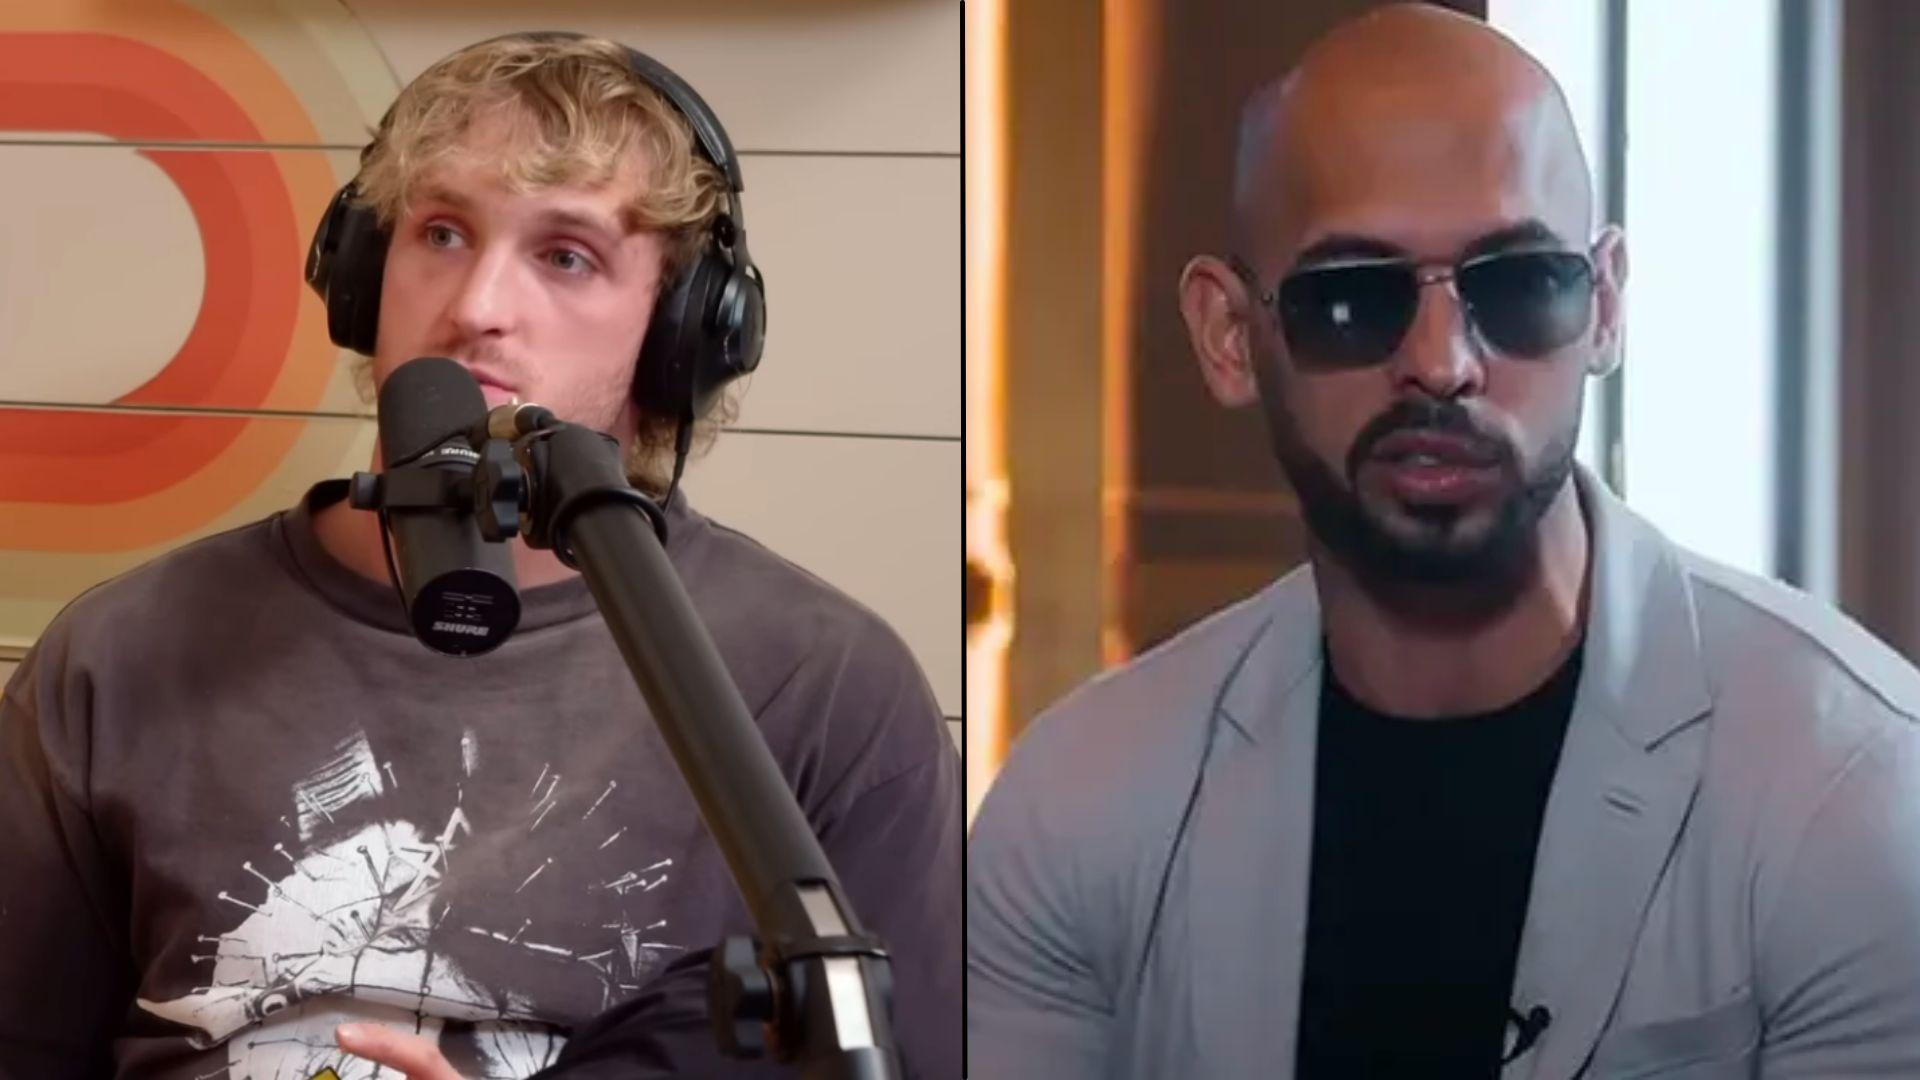 Logan Paul and Andrew Tate talking to camera and into mix side by side